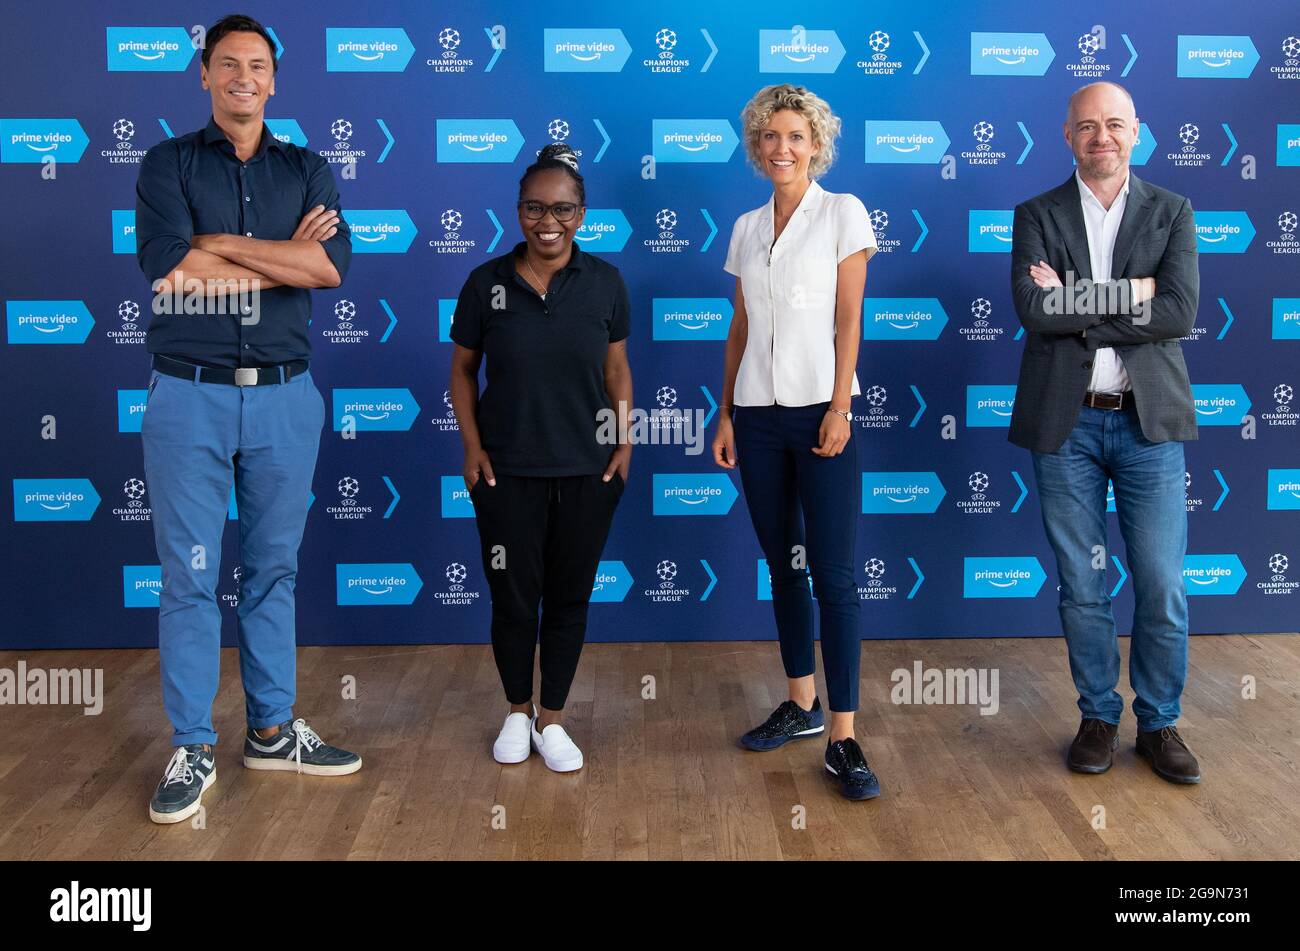 Munich, Germany. 27th July, 2021. Sebastian Hellmann (l-r), presenter,  Shary Reeves, presenter and reporter, Annika Zimmermann, presenter and  reporter, and Alex Green, Managing Director Sports at Amazon Prime Video  EU, take part